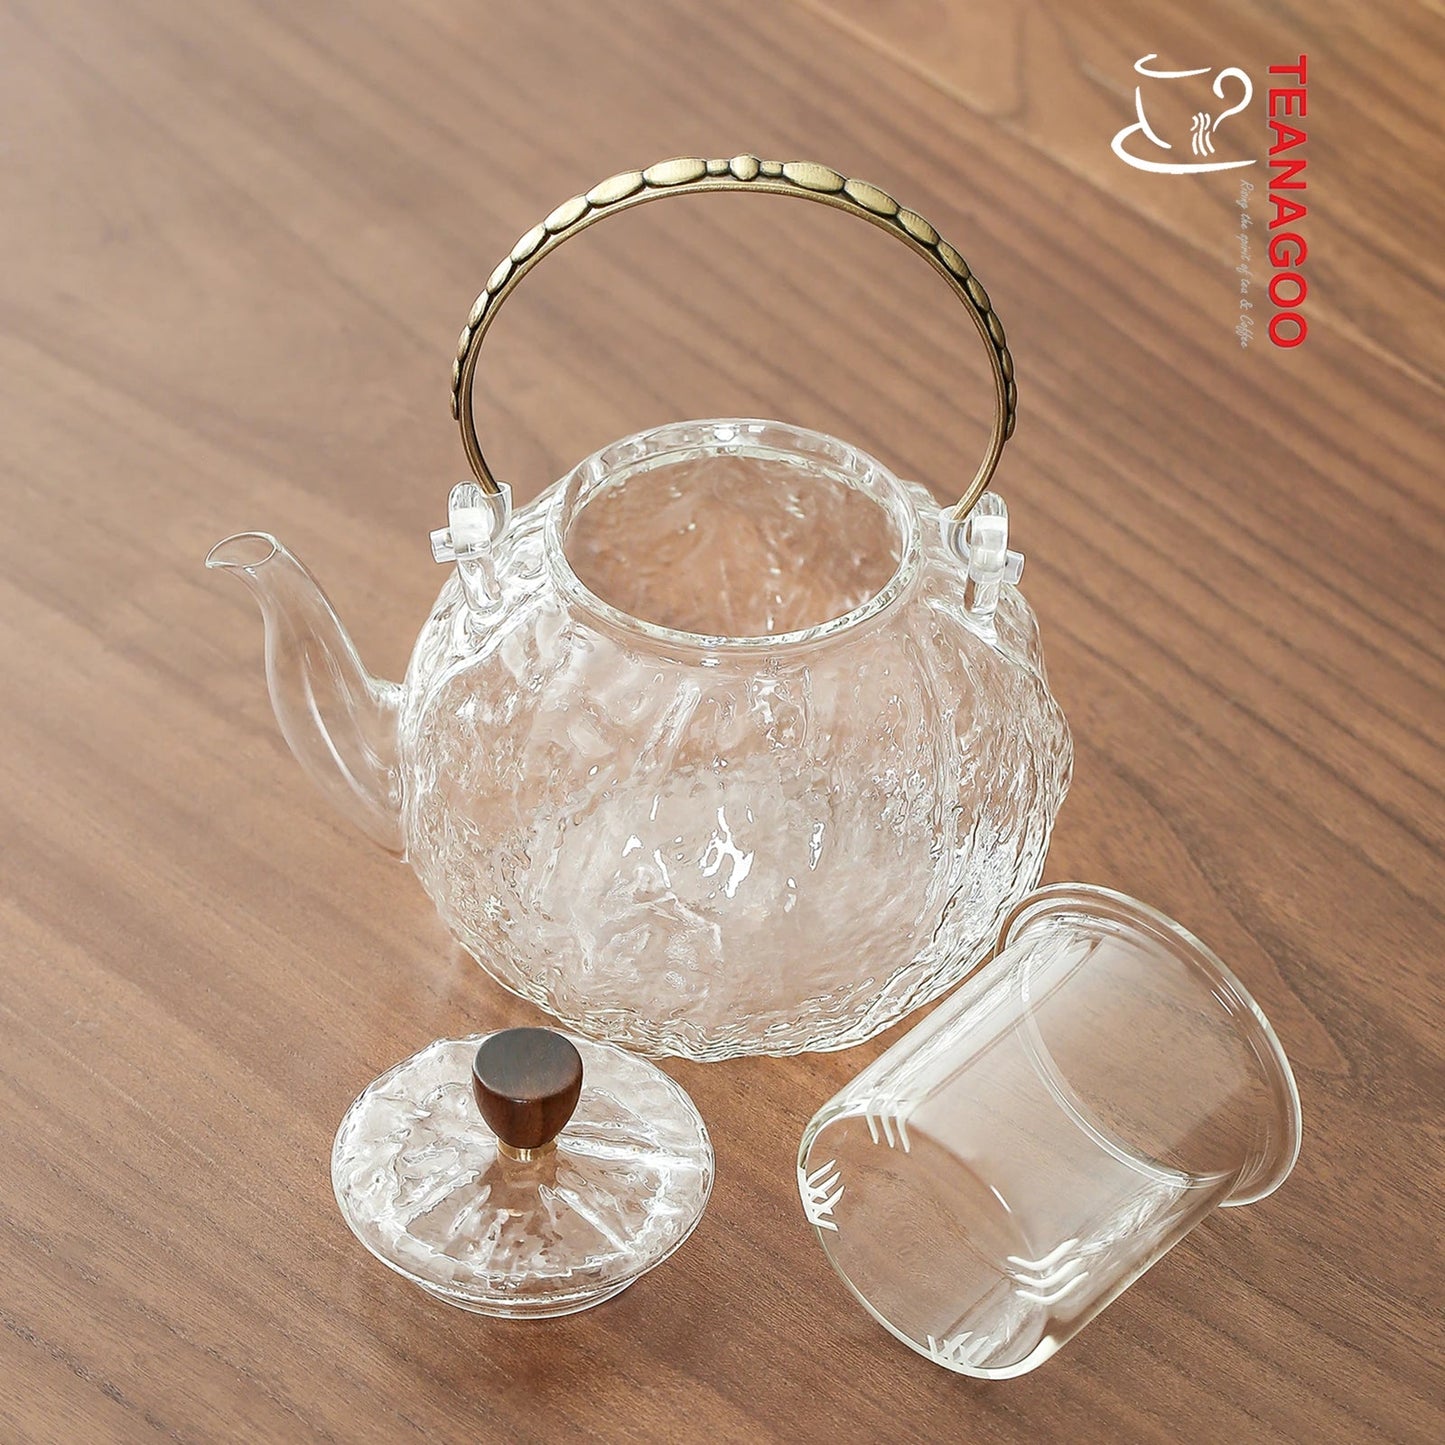 Heat-Resistant Glass Teapot with Infuser Lid and Wood Handle for Loose Leaf Tea and Blooming Tea